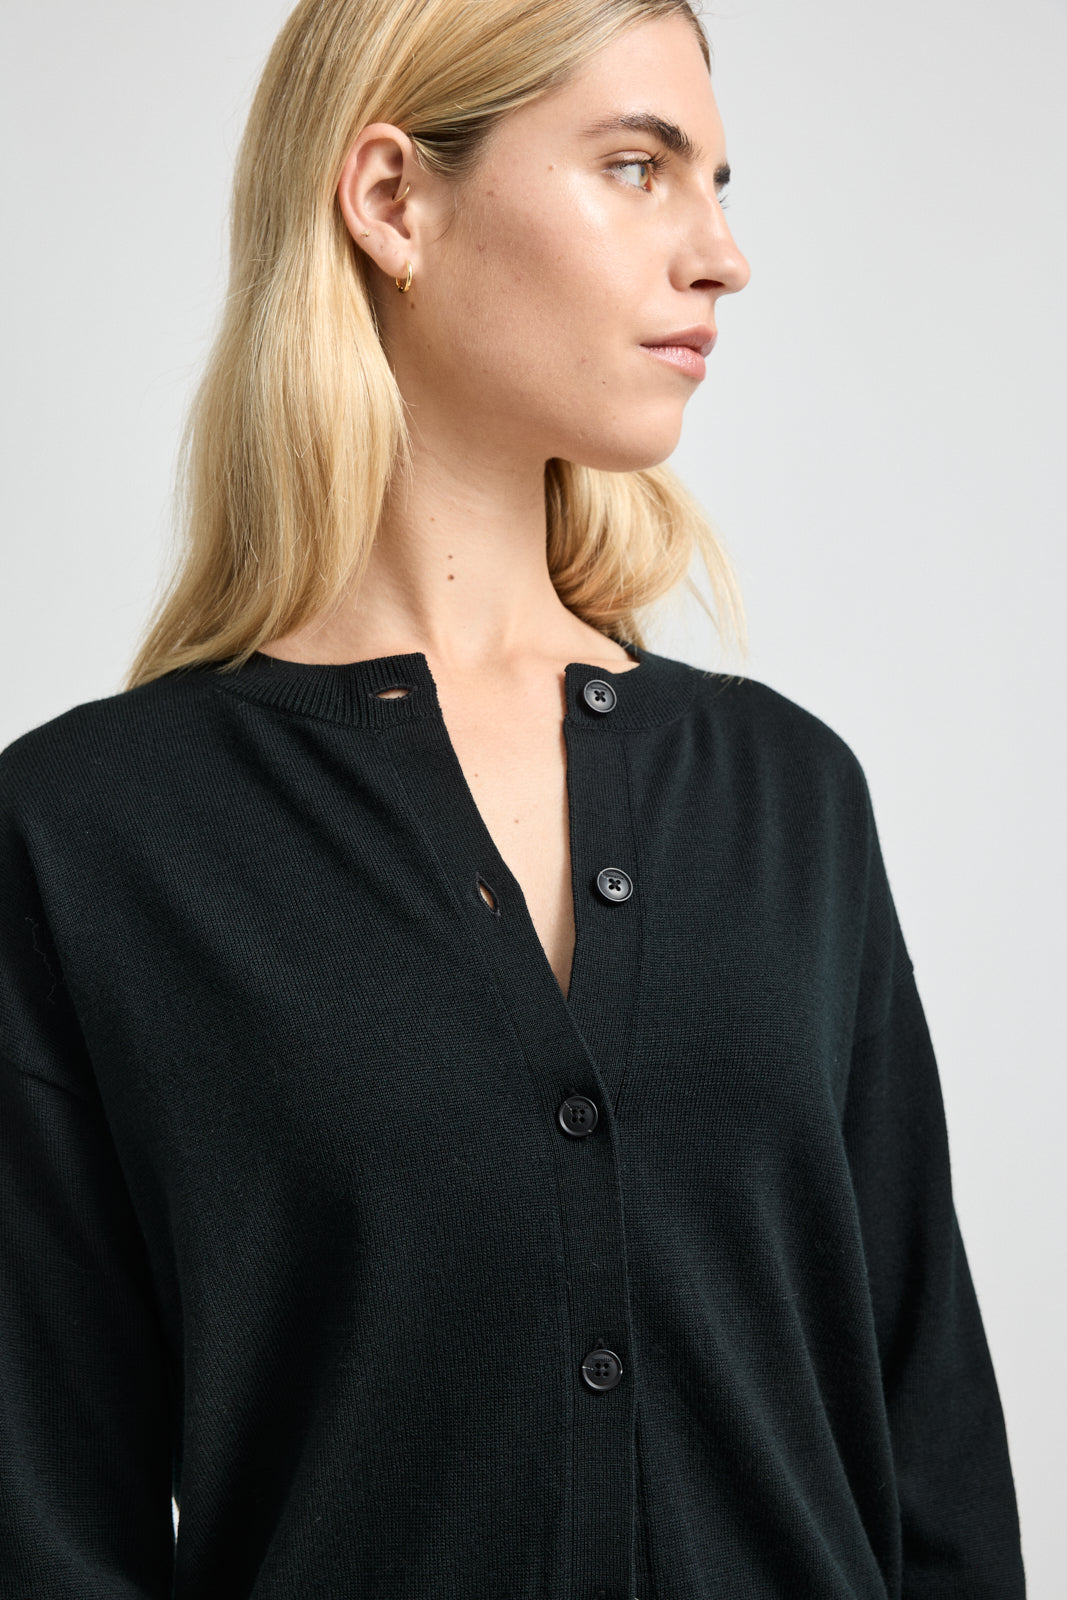 TOORALLIE FINE KNIT CARDIGAN - BLACK - THE VOGUE STORE